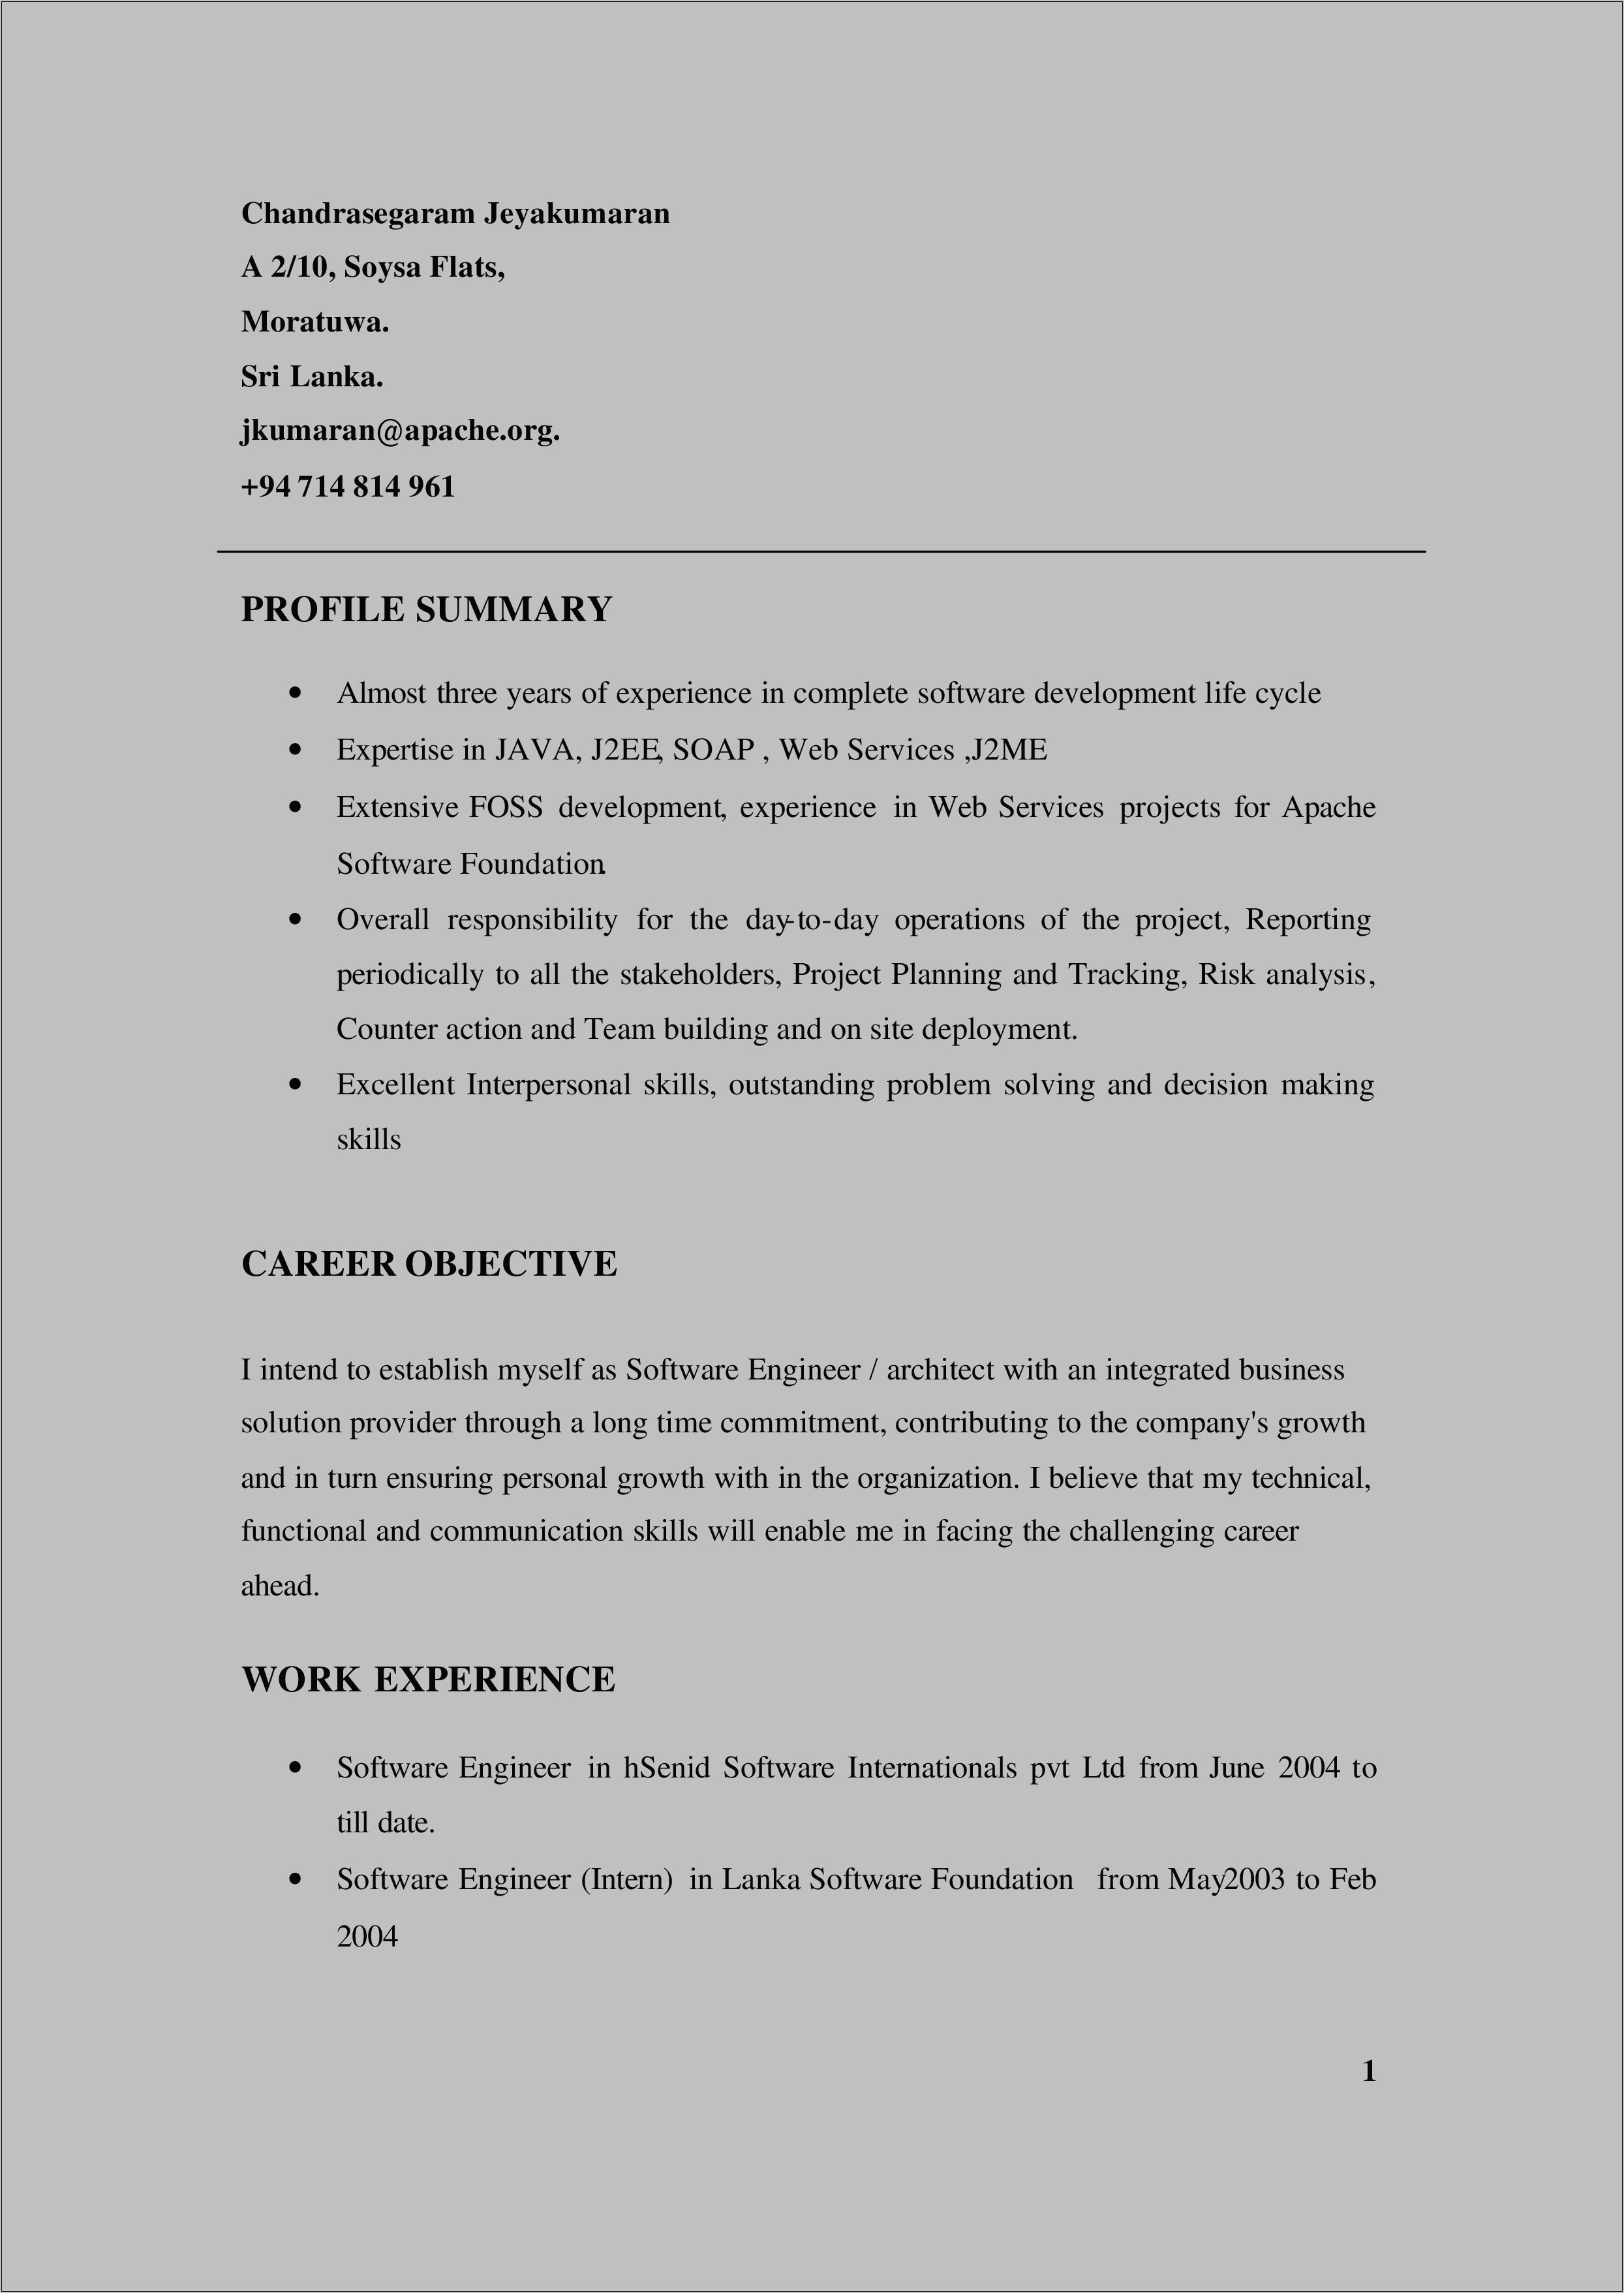 Resume Professional Experience And Additonal Experience